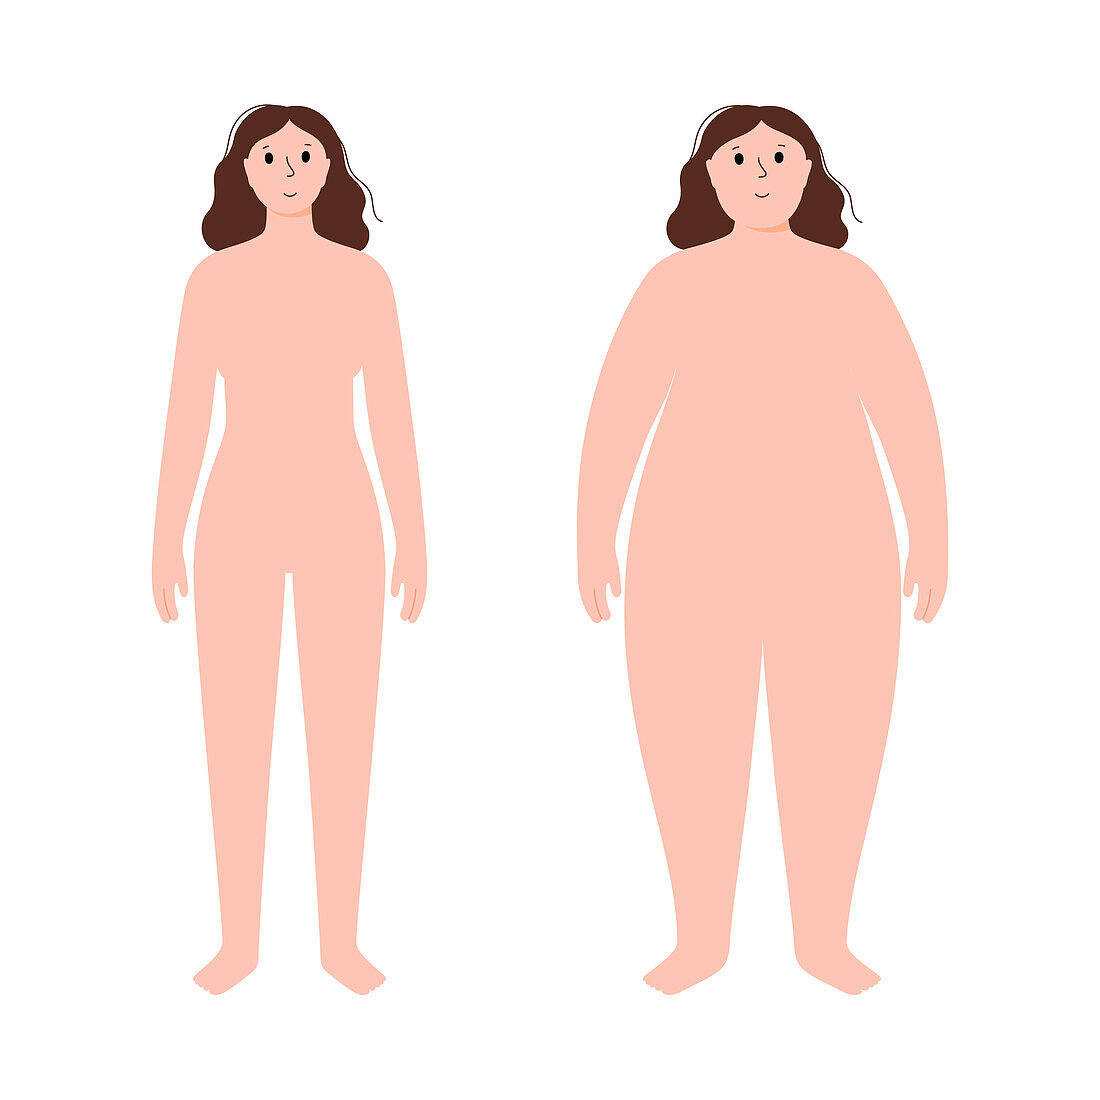 Obese and normal weight woman, illustration